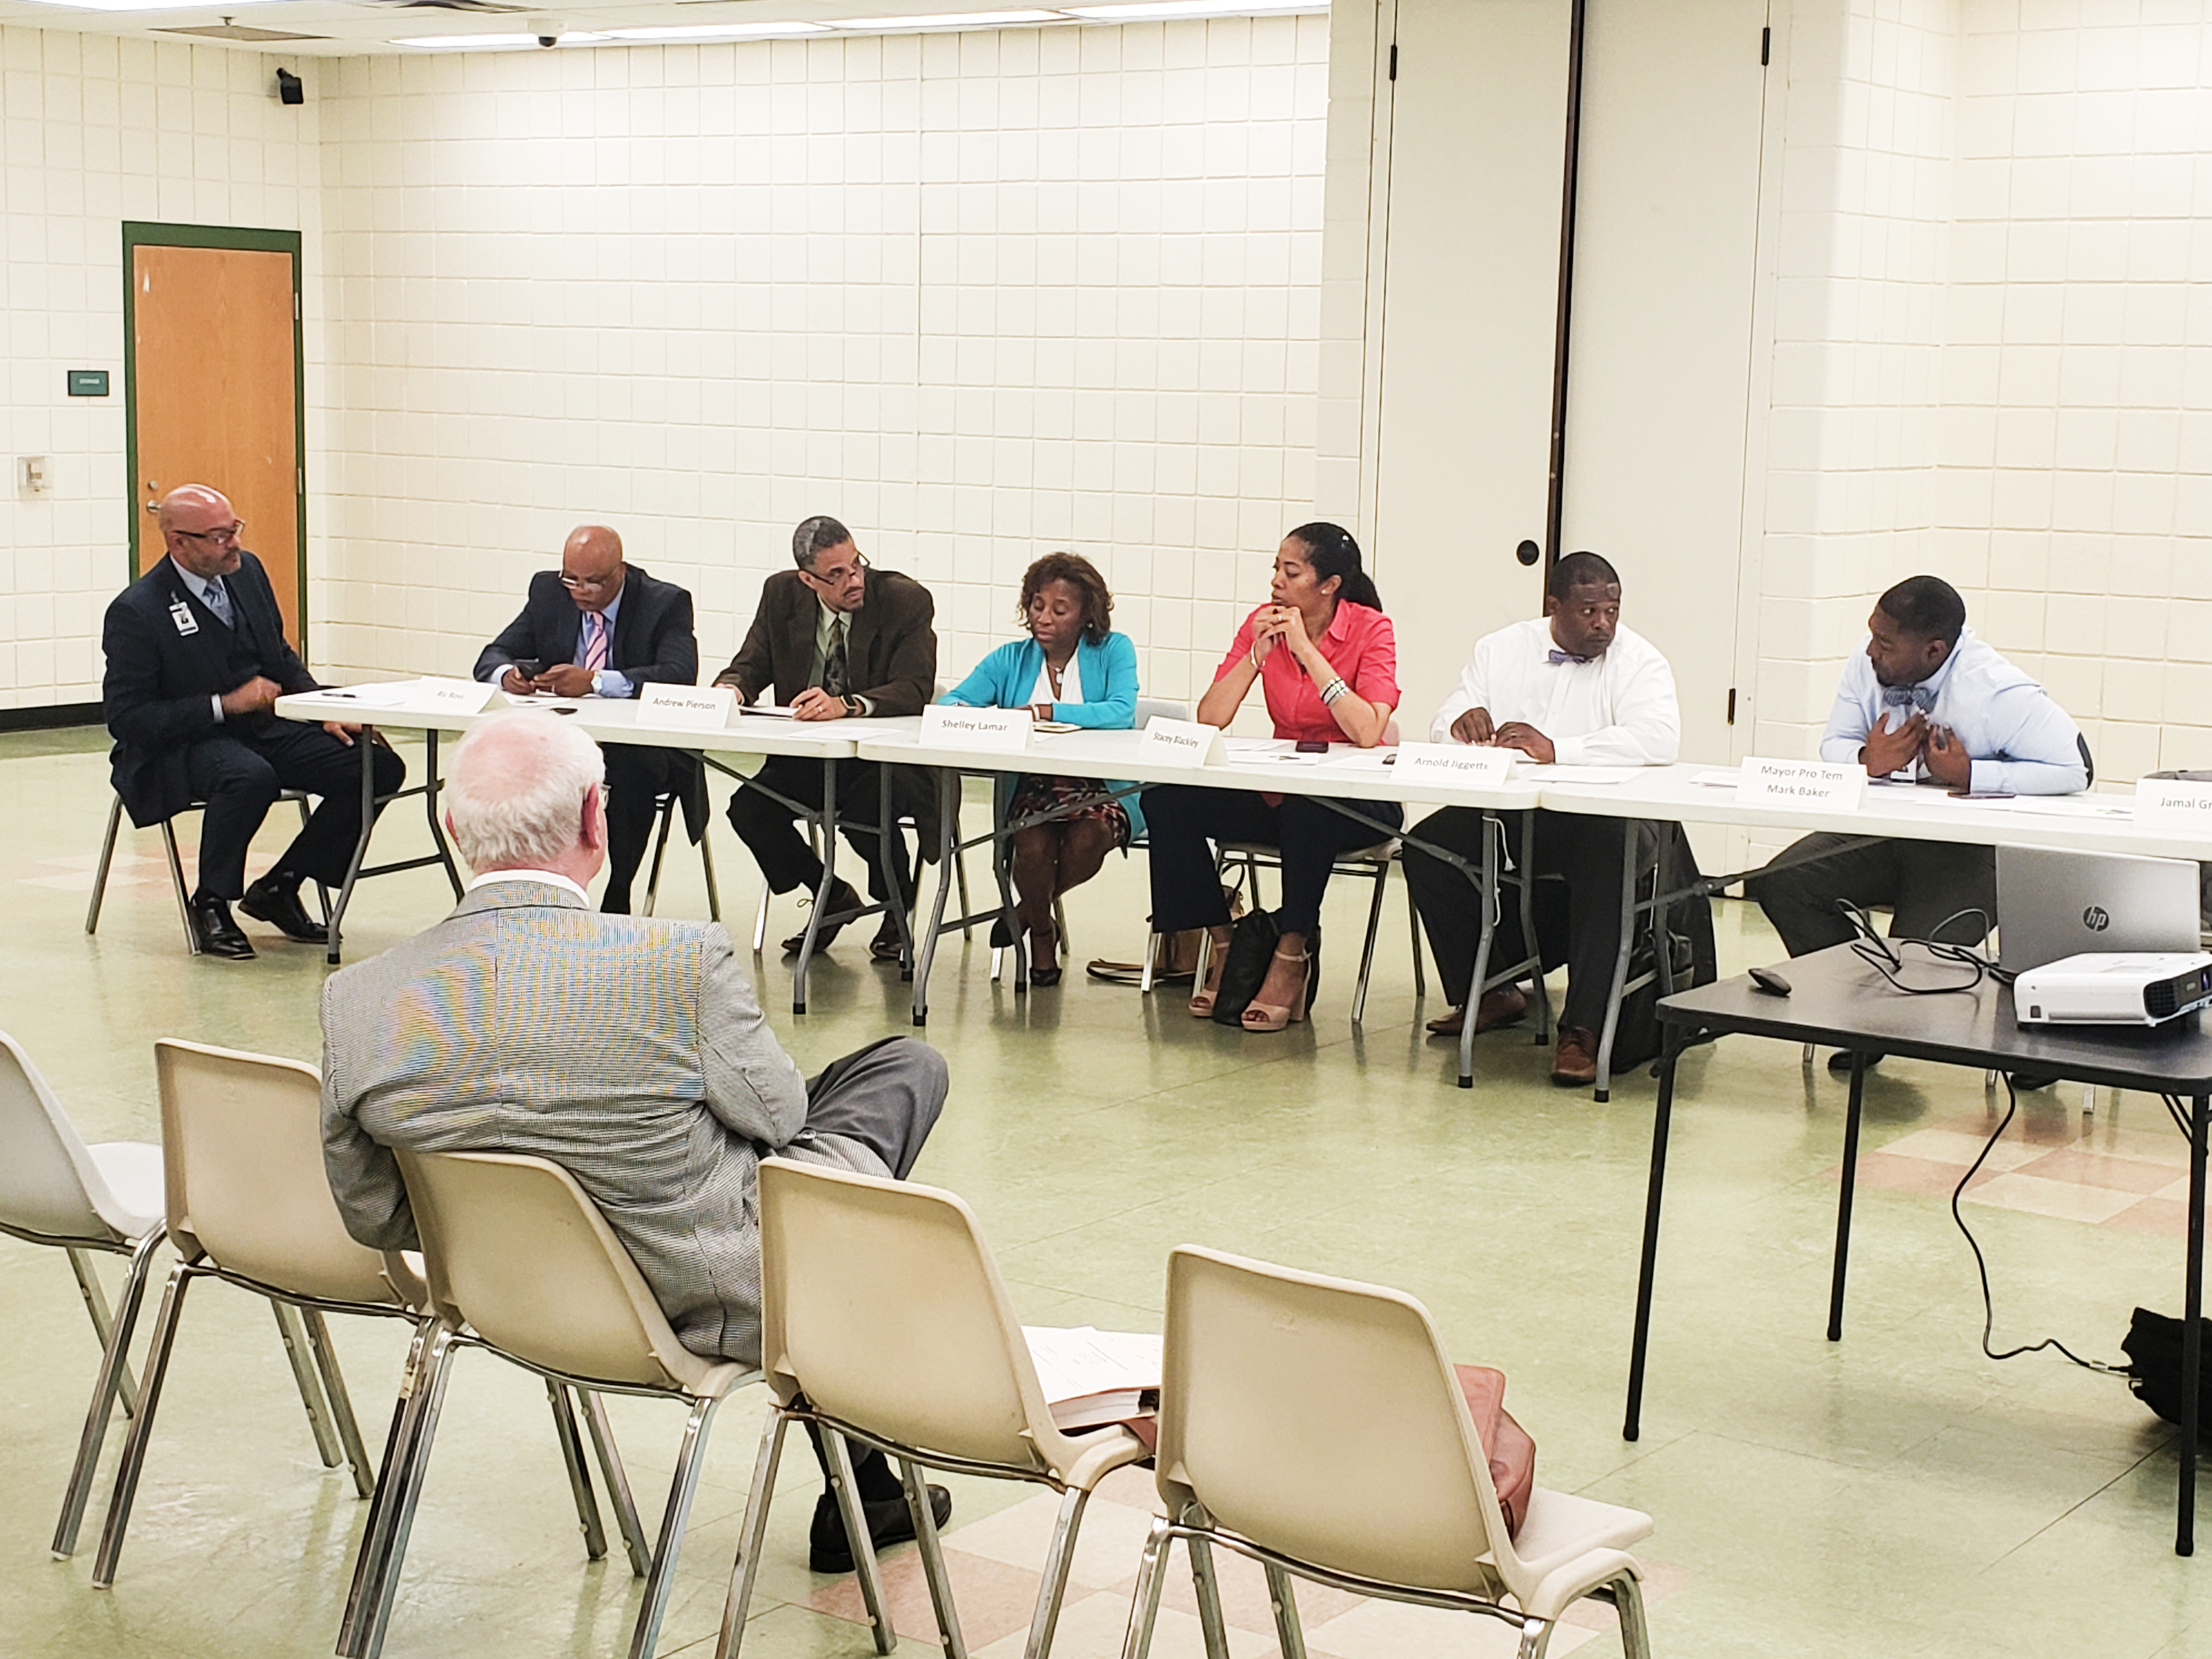 South Fulton Development Authority to Meet on Sept. 5